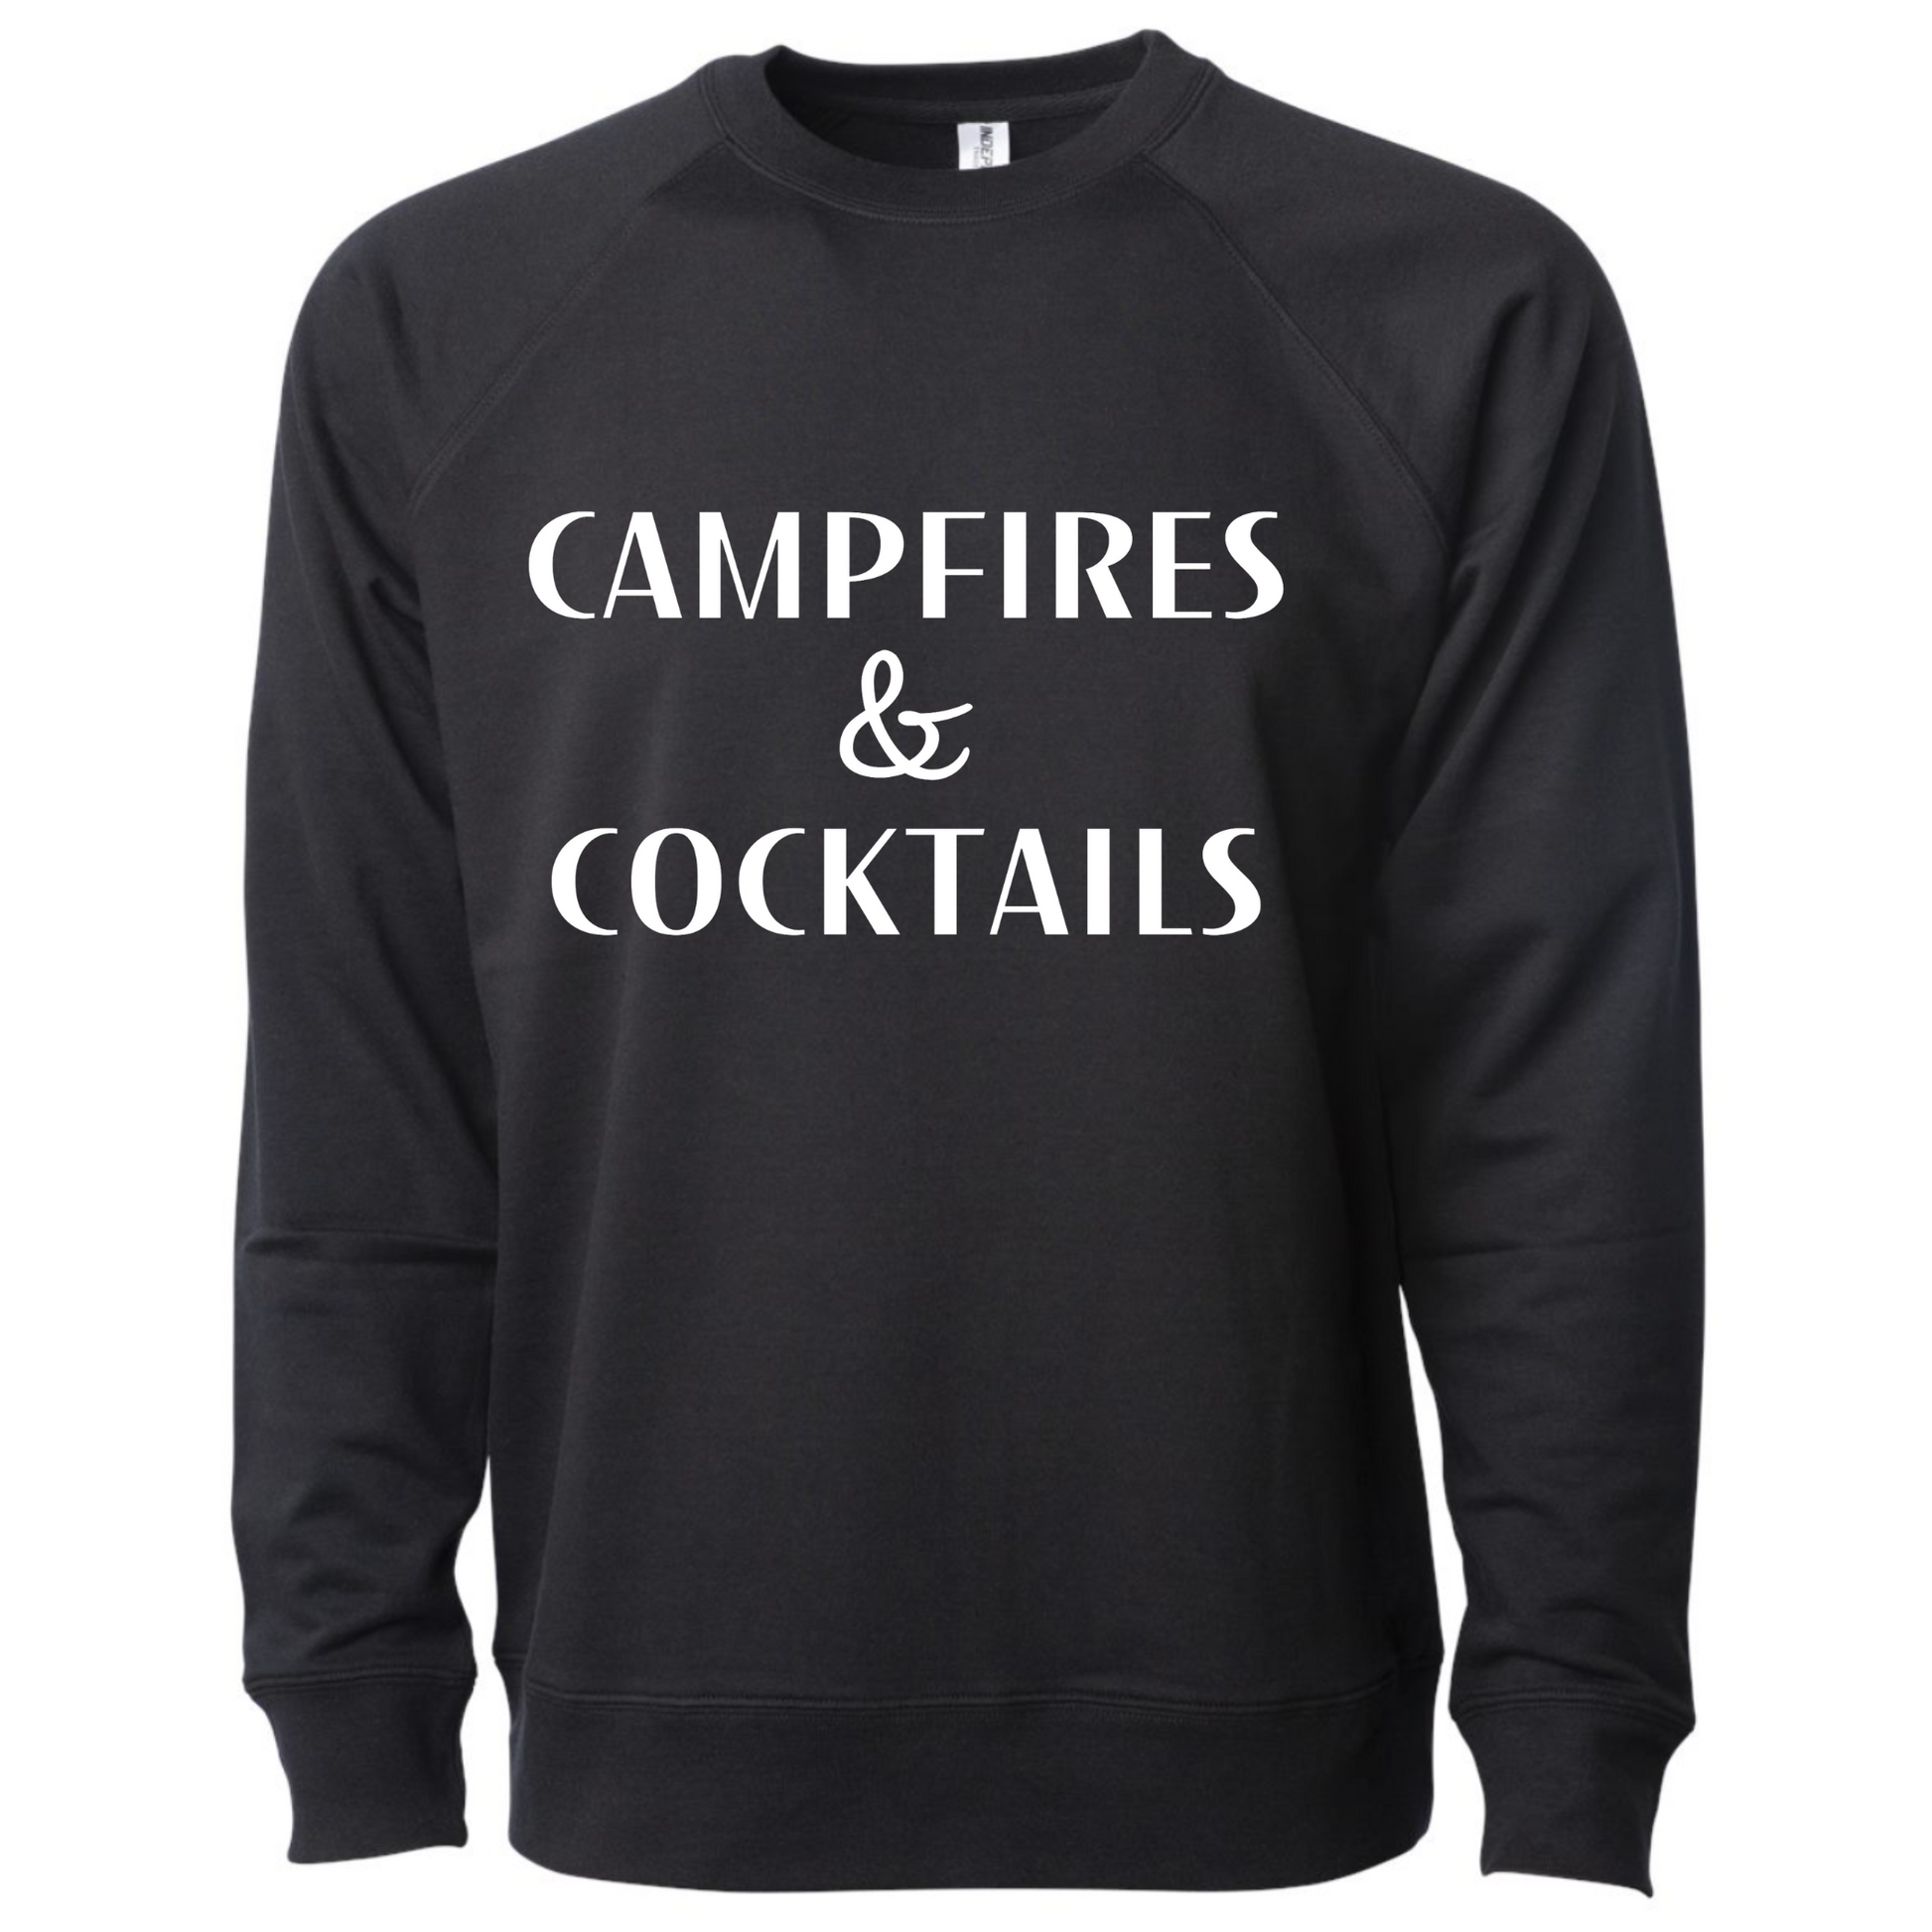 Campfires & Cocktails - Pull Over Sweatshirt. Black unisex crew neck pull over sweatshirt in a lightweight fabric with the saying "campfires & cocktails" in a bold white font. This is the front view of the sweatshirt.